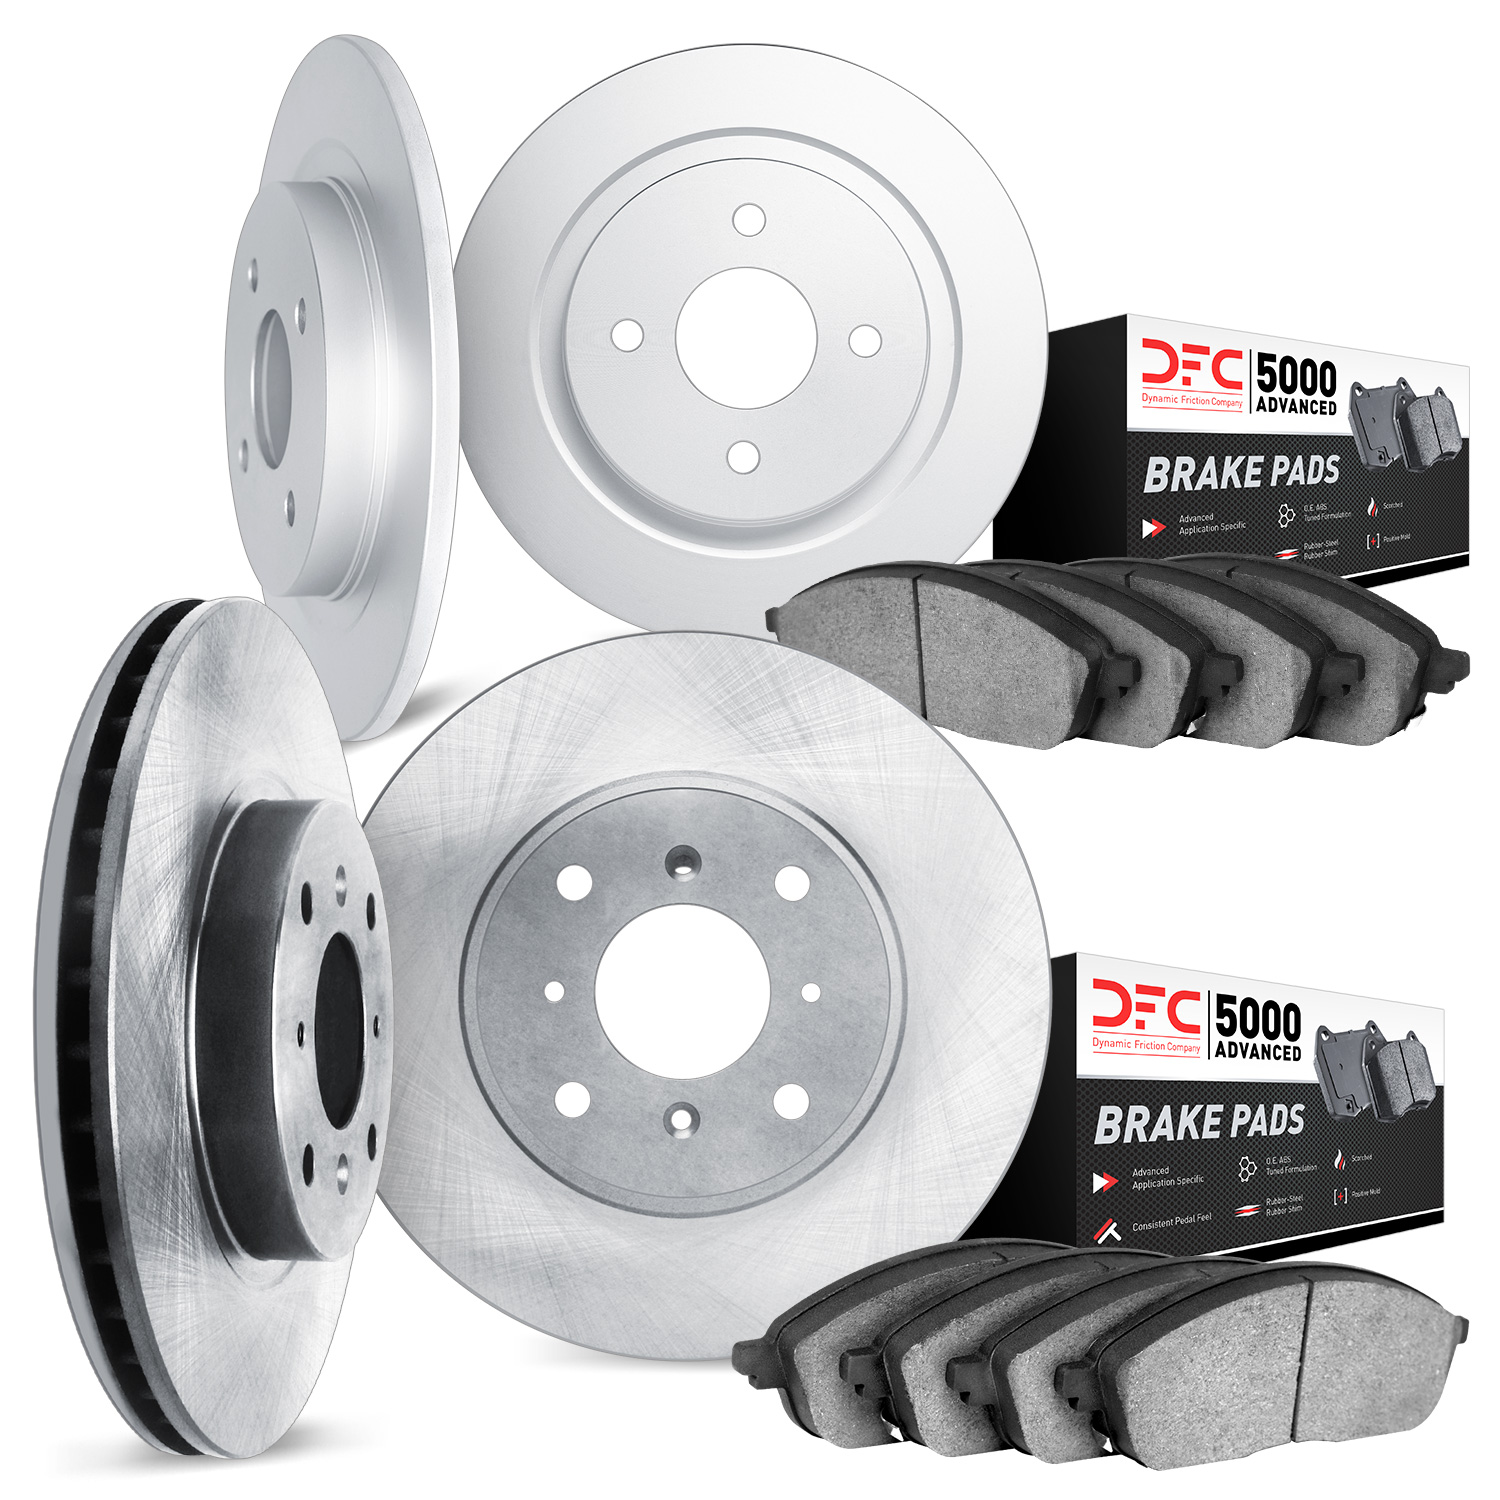 6504-01002 Brake Rotors w/5000 Advanced Brake Pads Kit, 2004-2007 Multiple Makes/Models, Position: Front and Rear